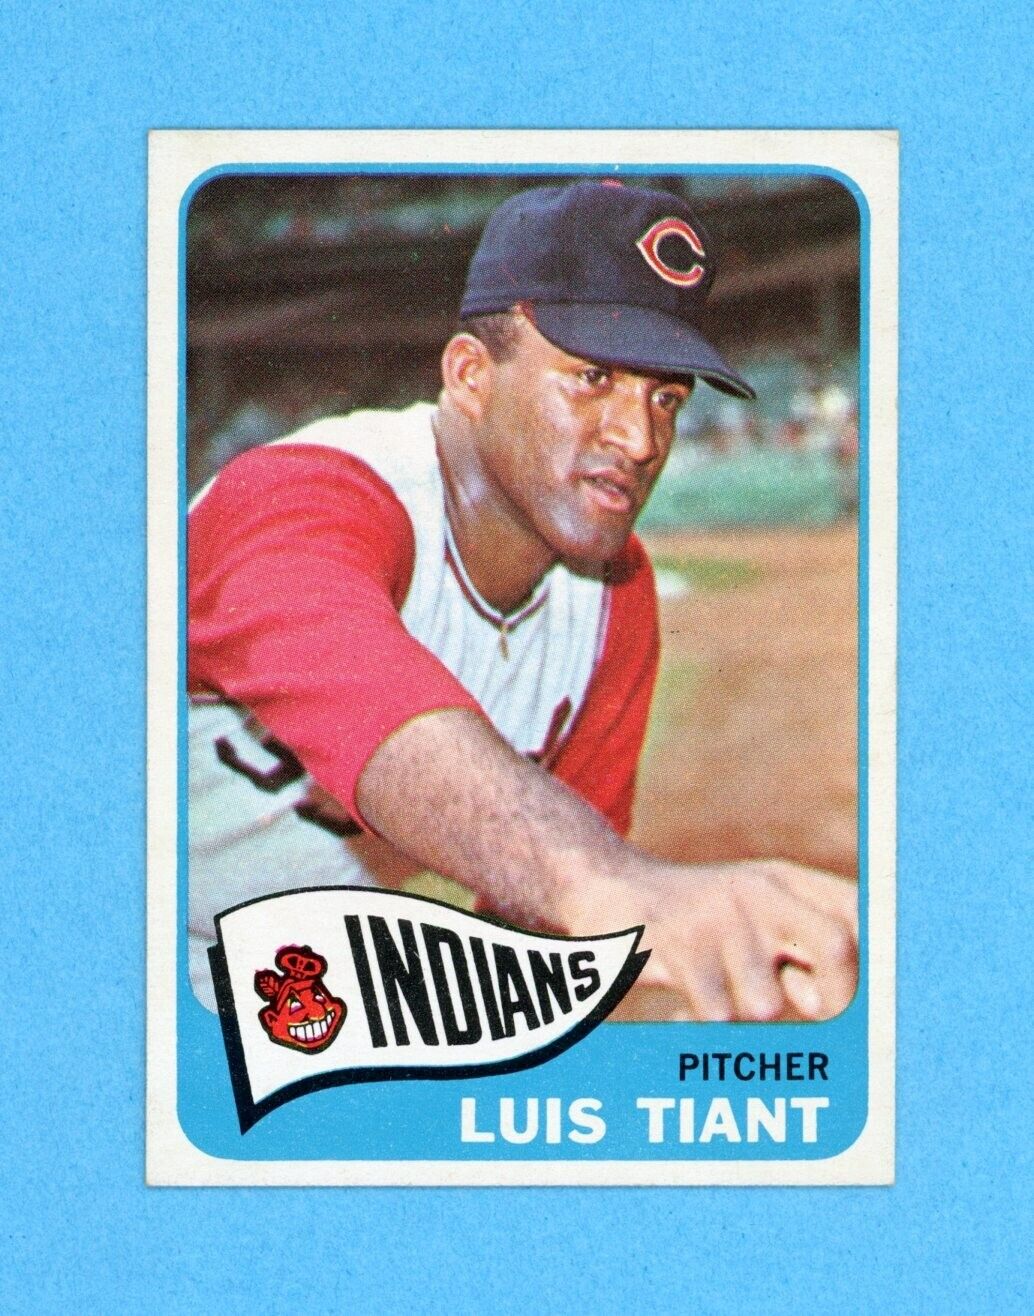 1965 Topps #145 Luis Tiant Cleveland Indians Rookie Baseball Card Ex/Mt - NM